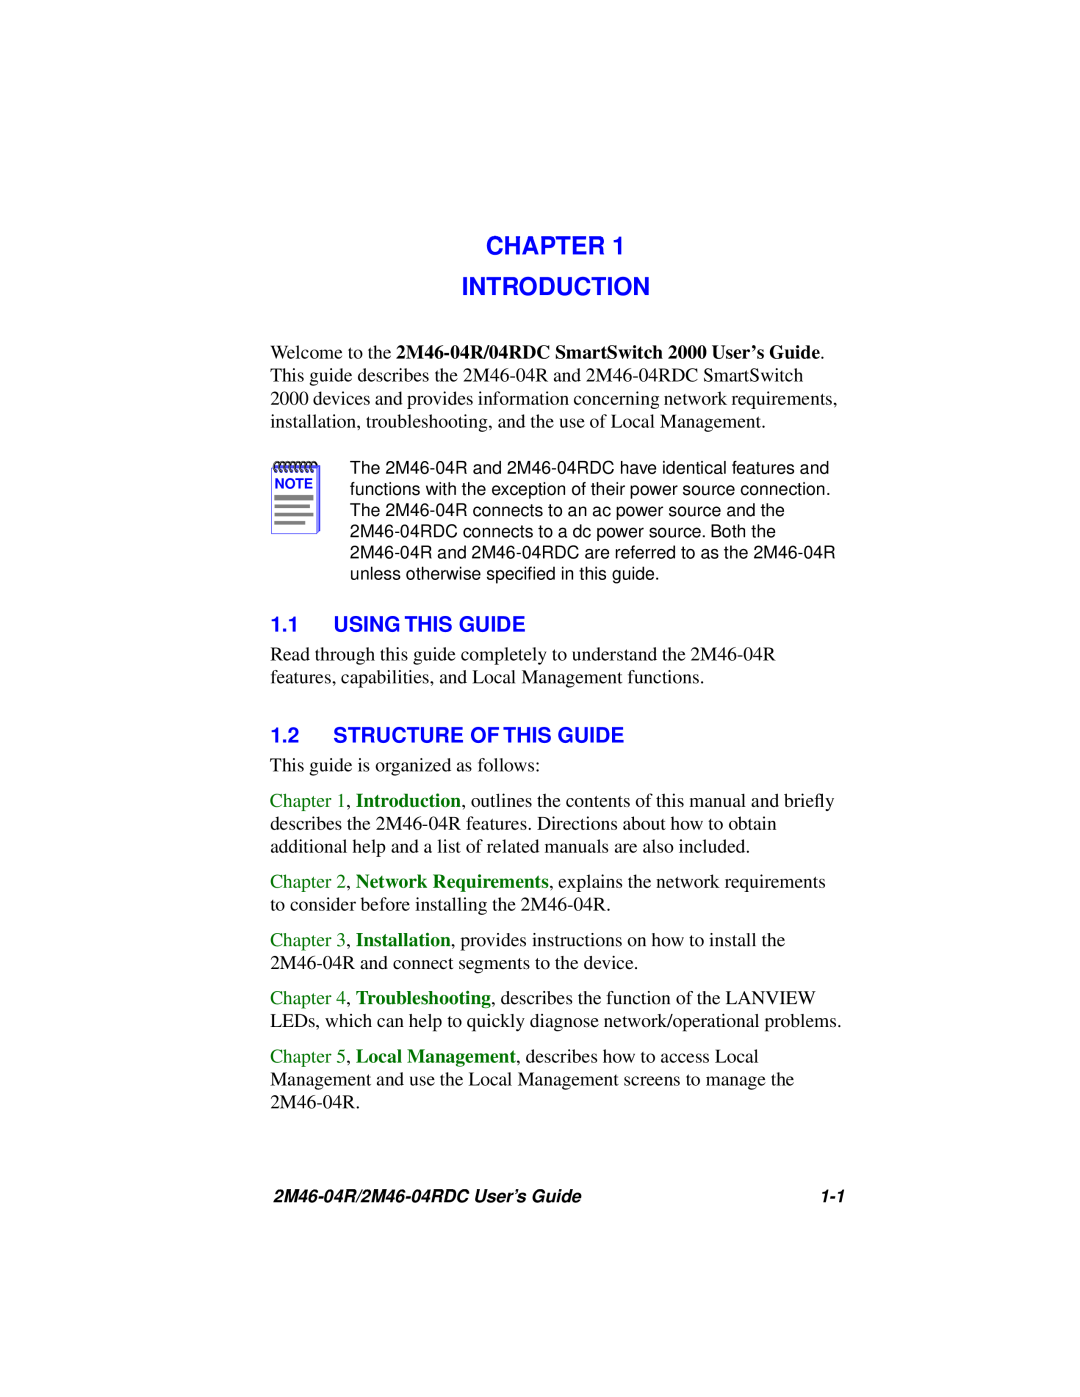 Cabletron Systems pmn manual Chapter Introduction, Using This Guide, Structure Of This Guide 